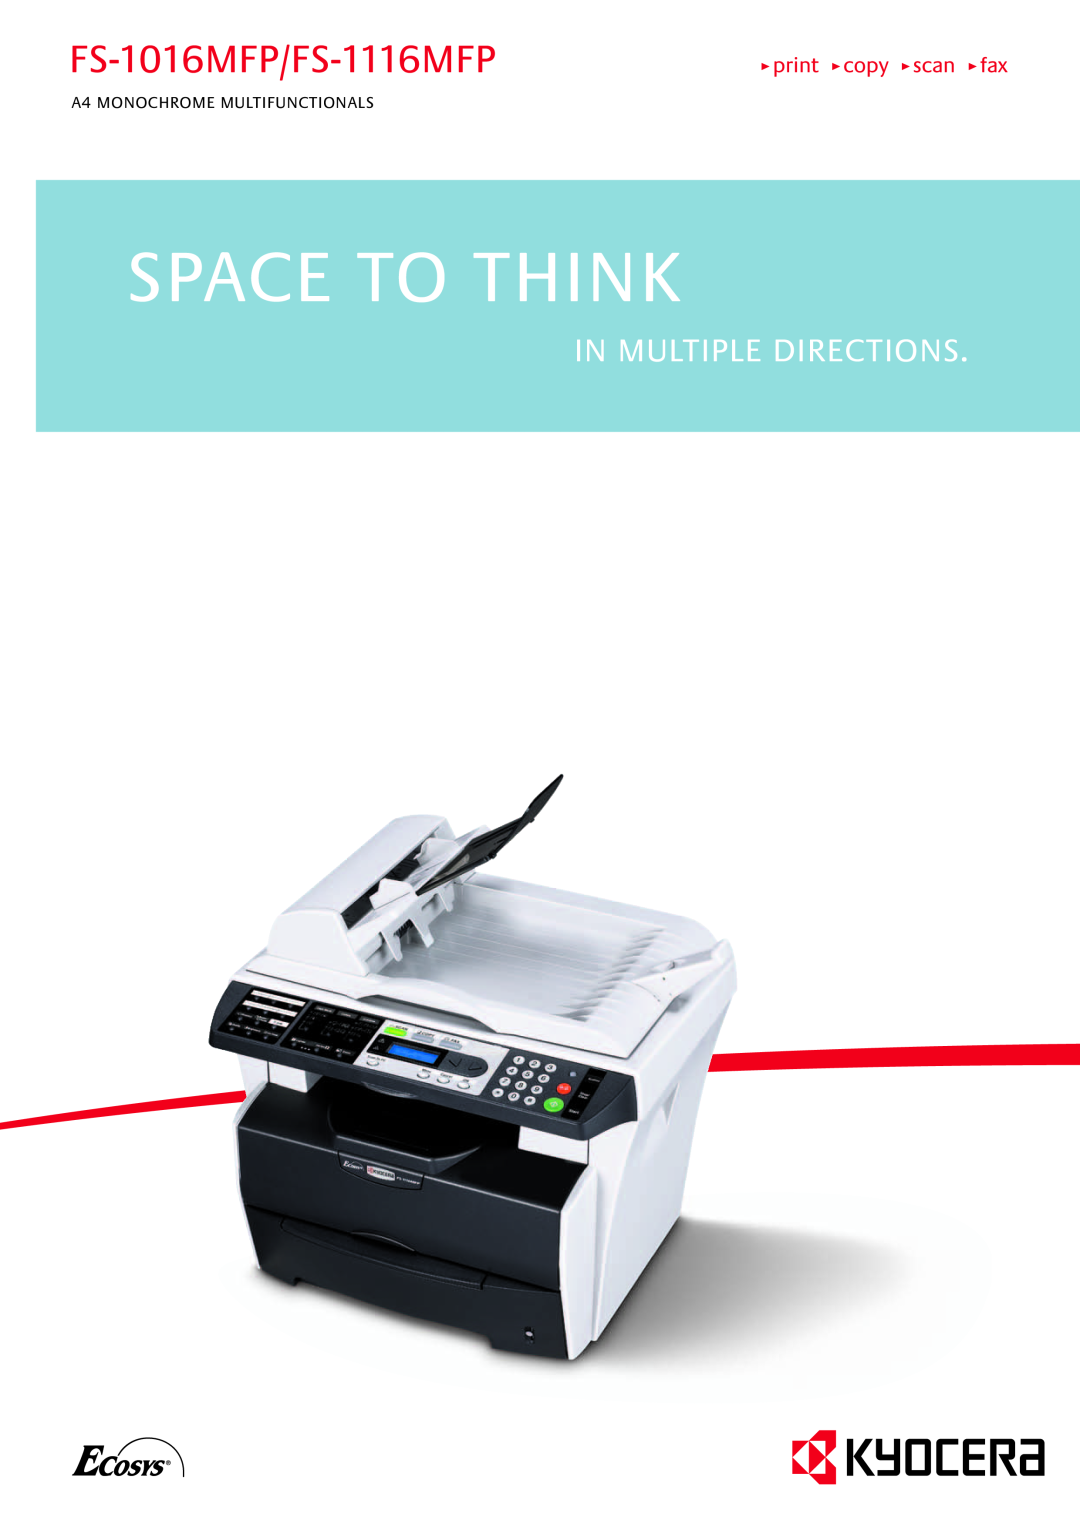 Kyocera manual Space To Think, FS-1016MFP/FS-1116MFP, In Multiple Directions, print copy scan fax 